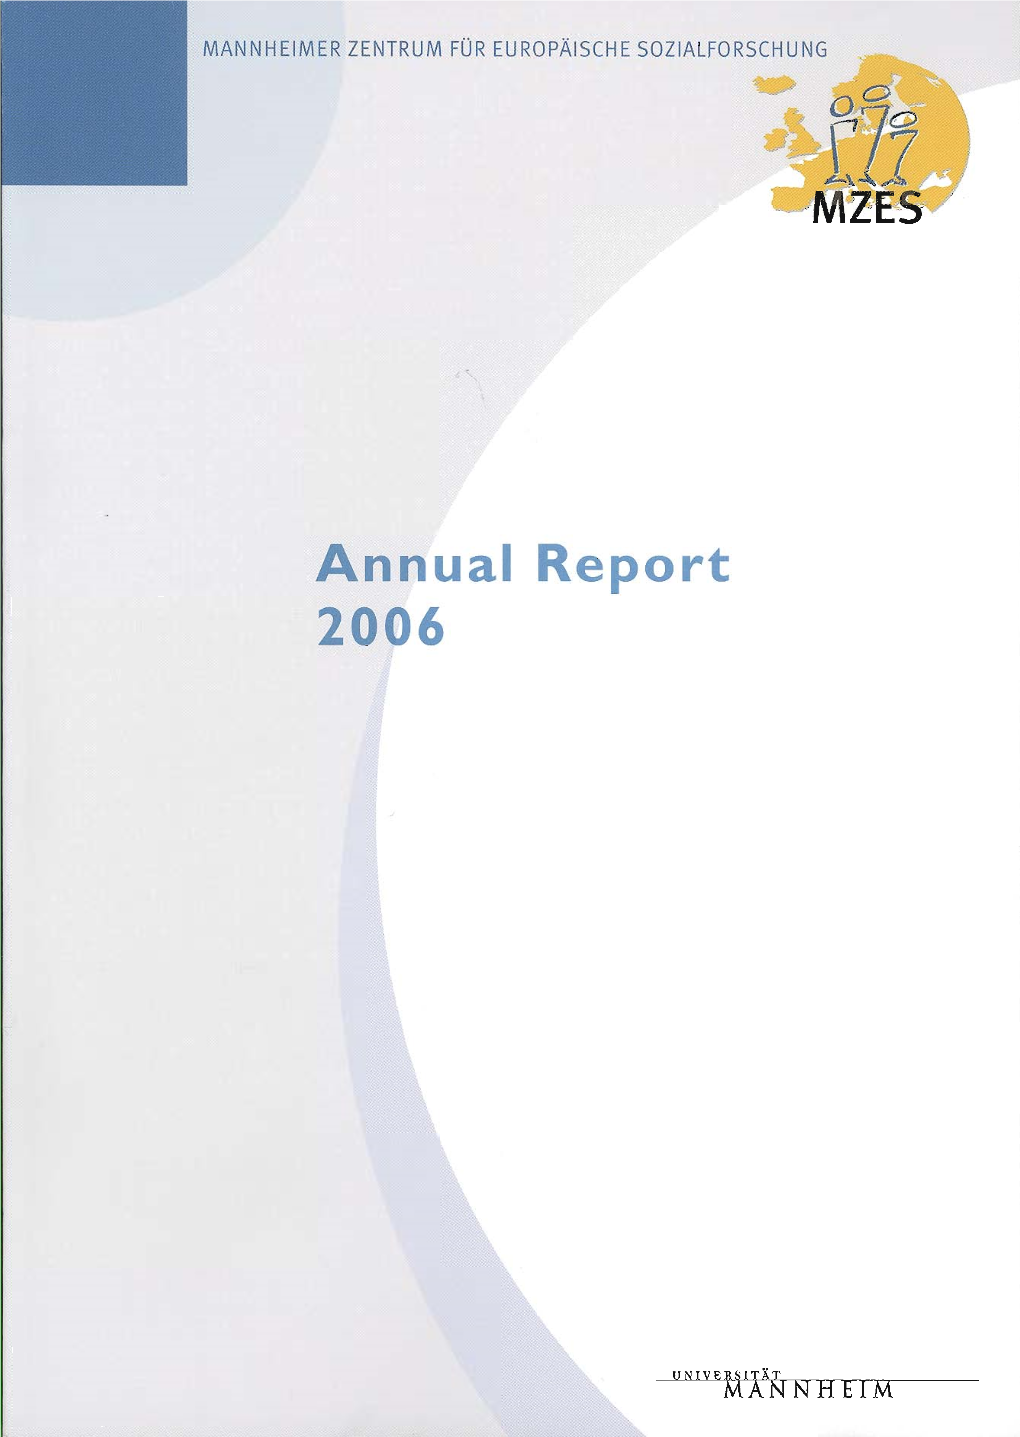 MZES Annual Report 2006